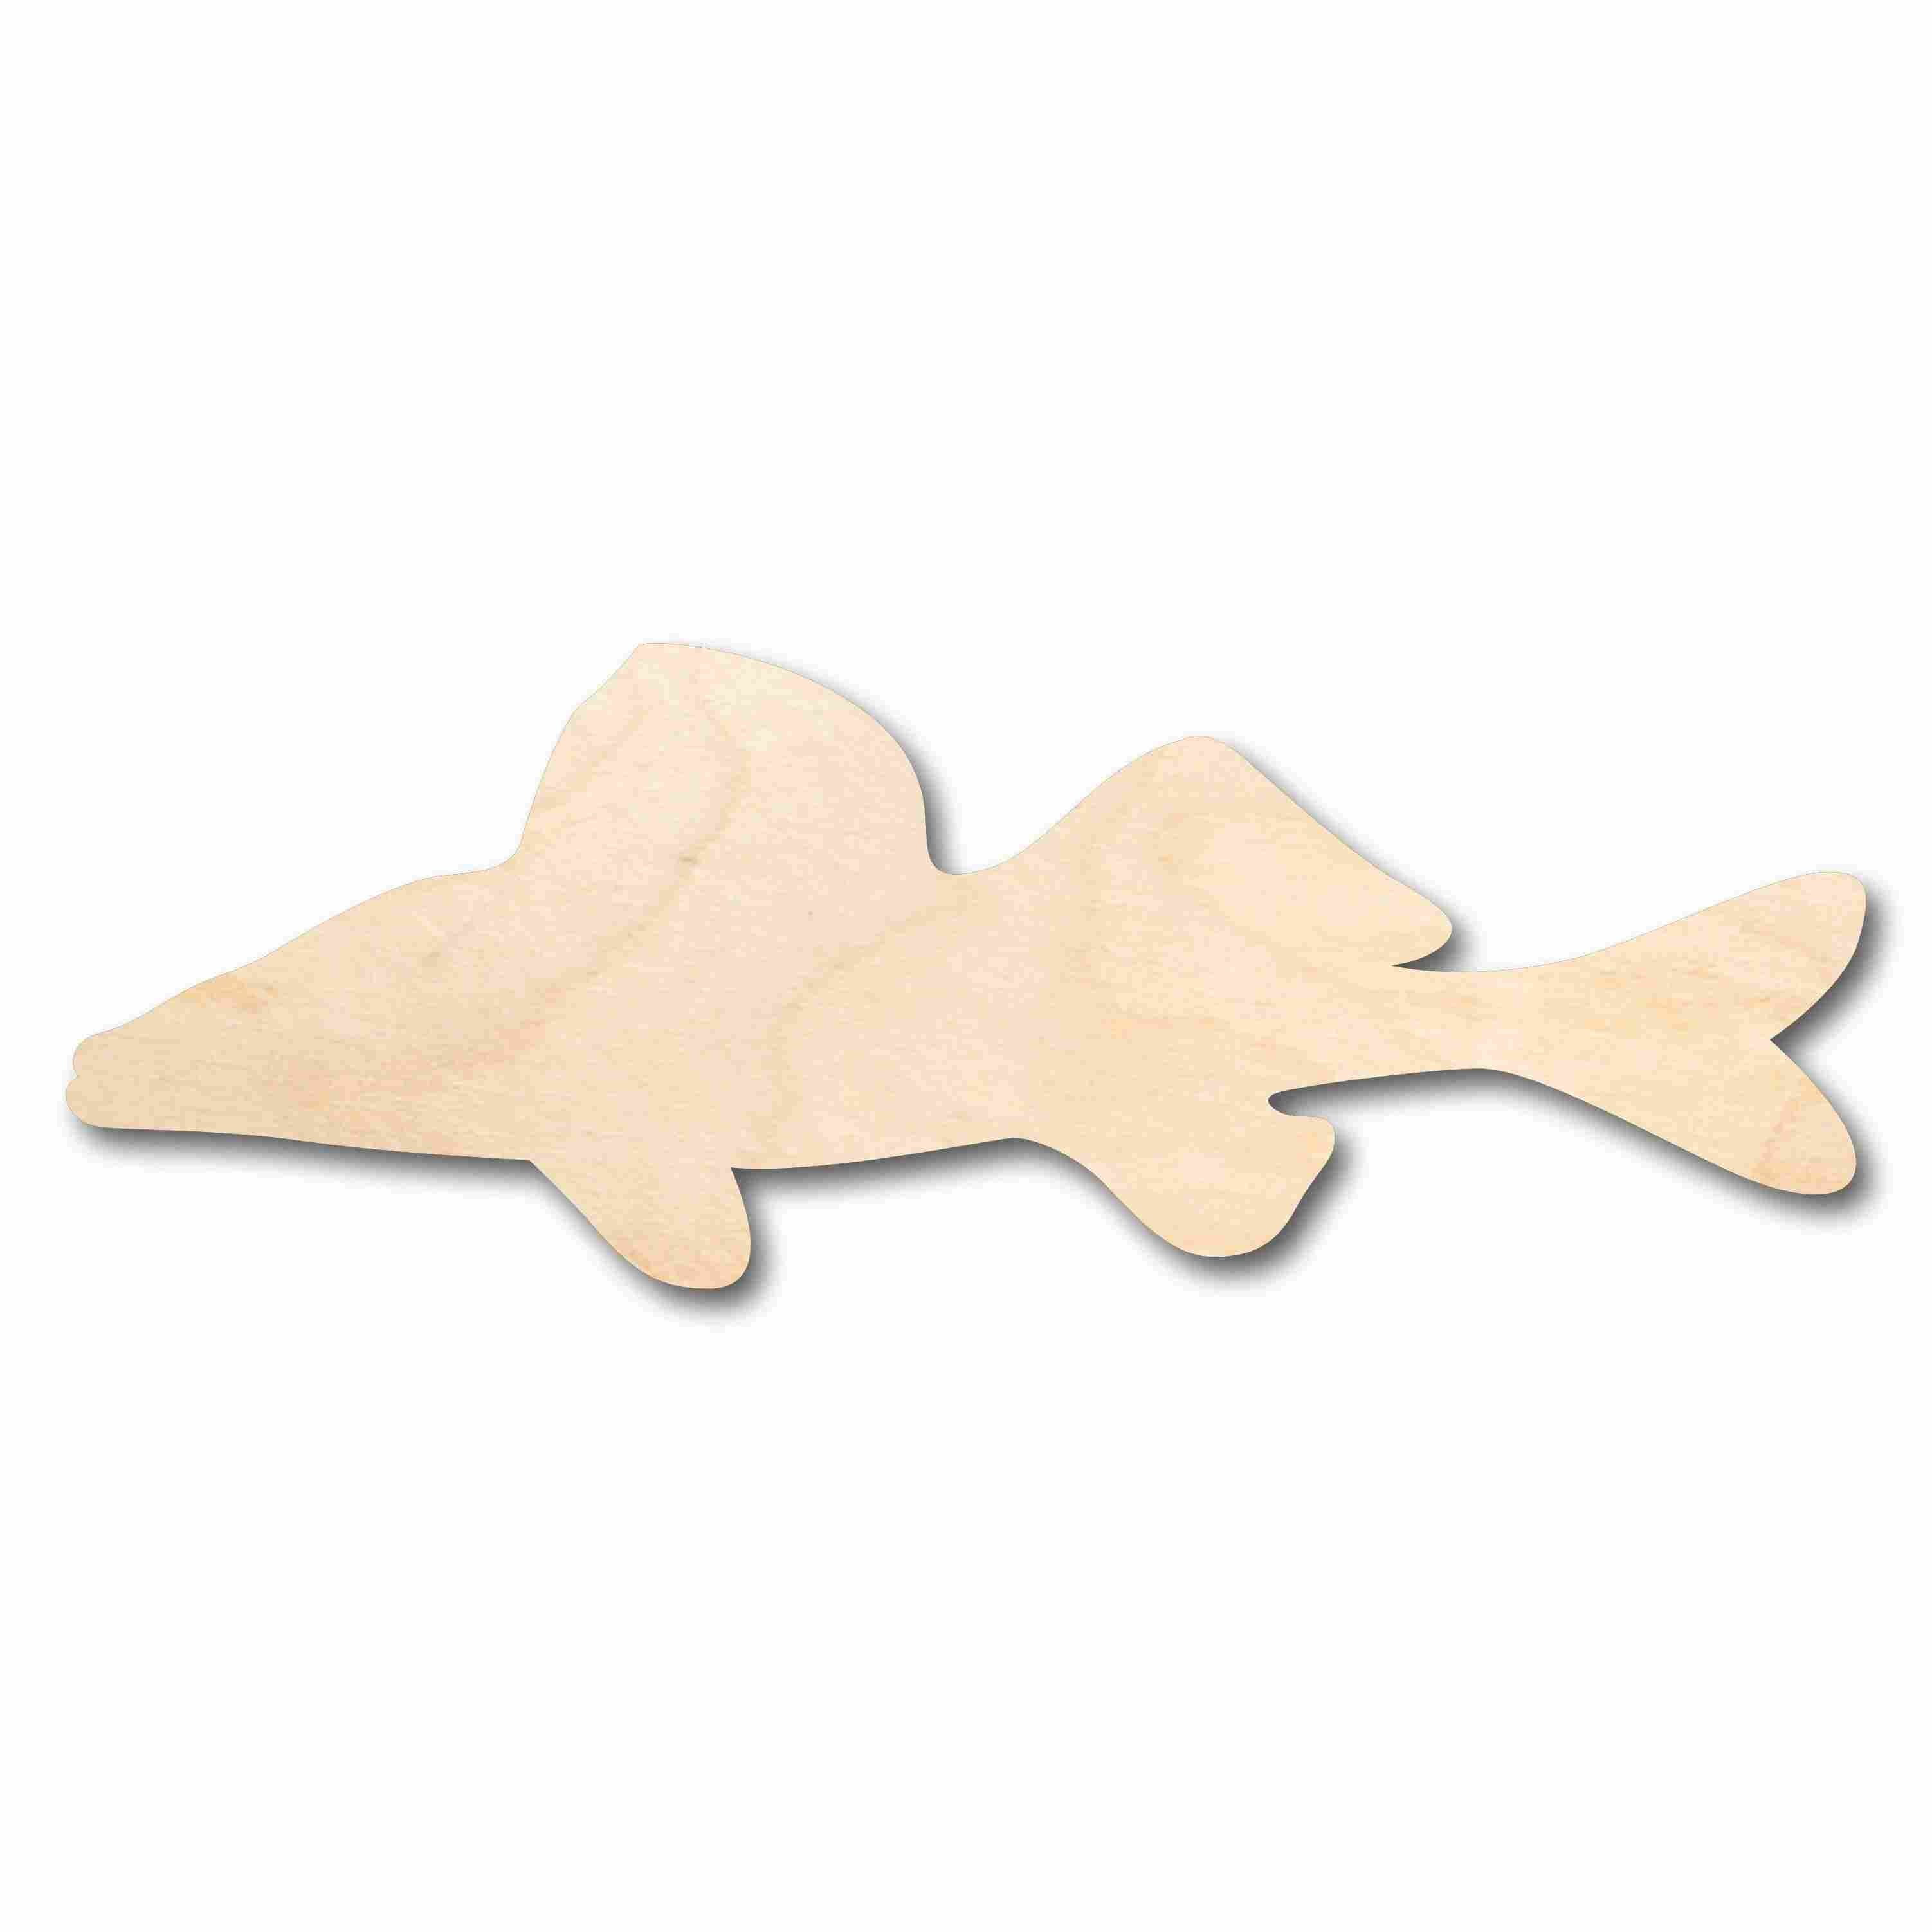 24 Pieces Unfinished Sea Creatures Wood Cutouts for Crafts, Wooden